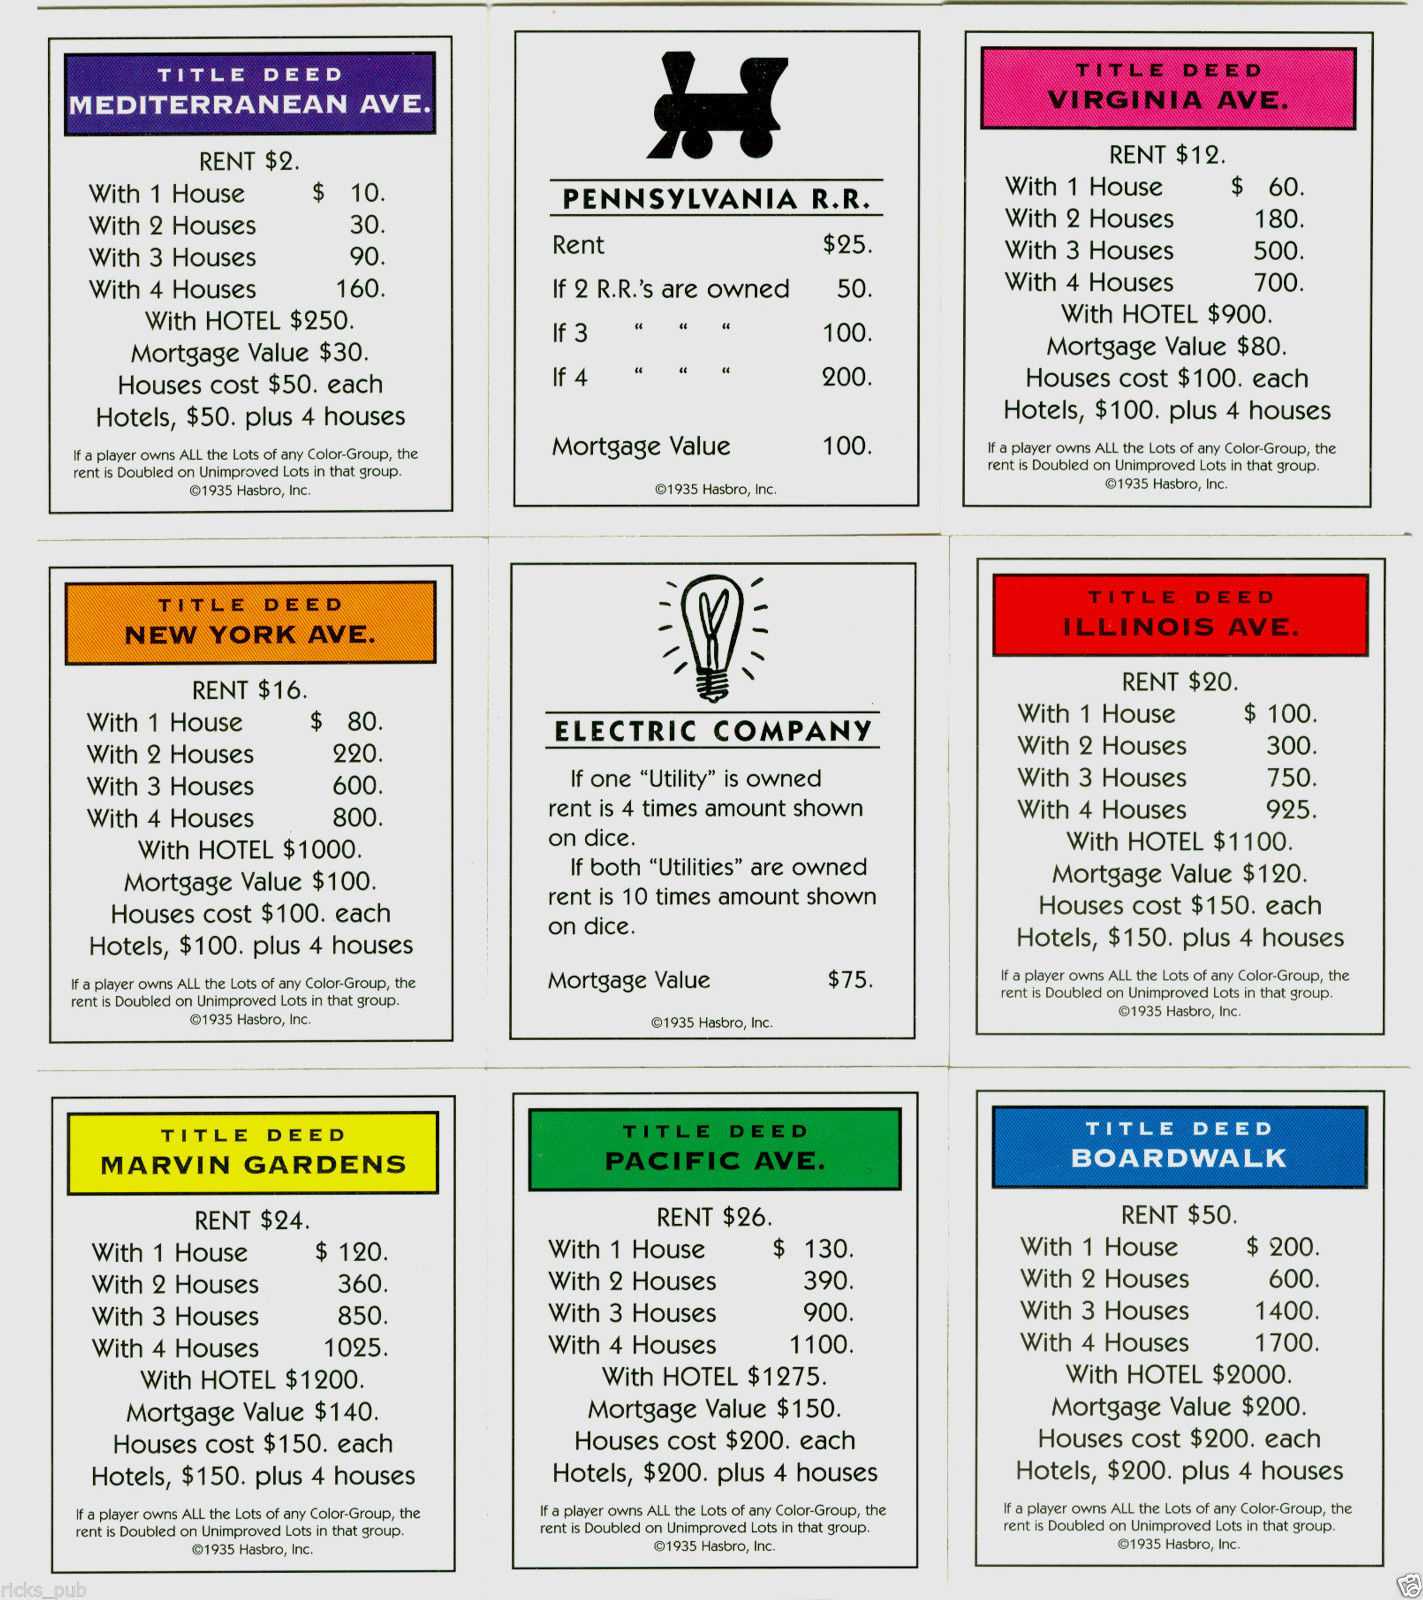 1C1 Monopoly Chance Card Template | Wiring Library Throughout Chance Card Template